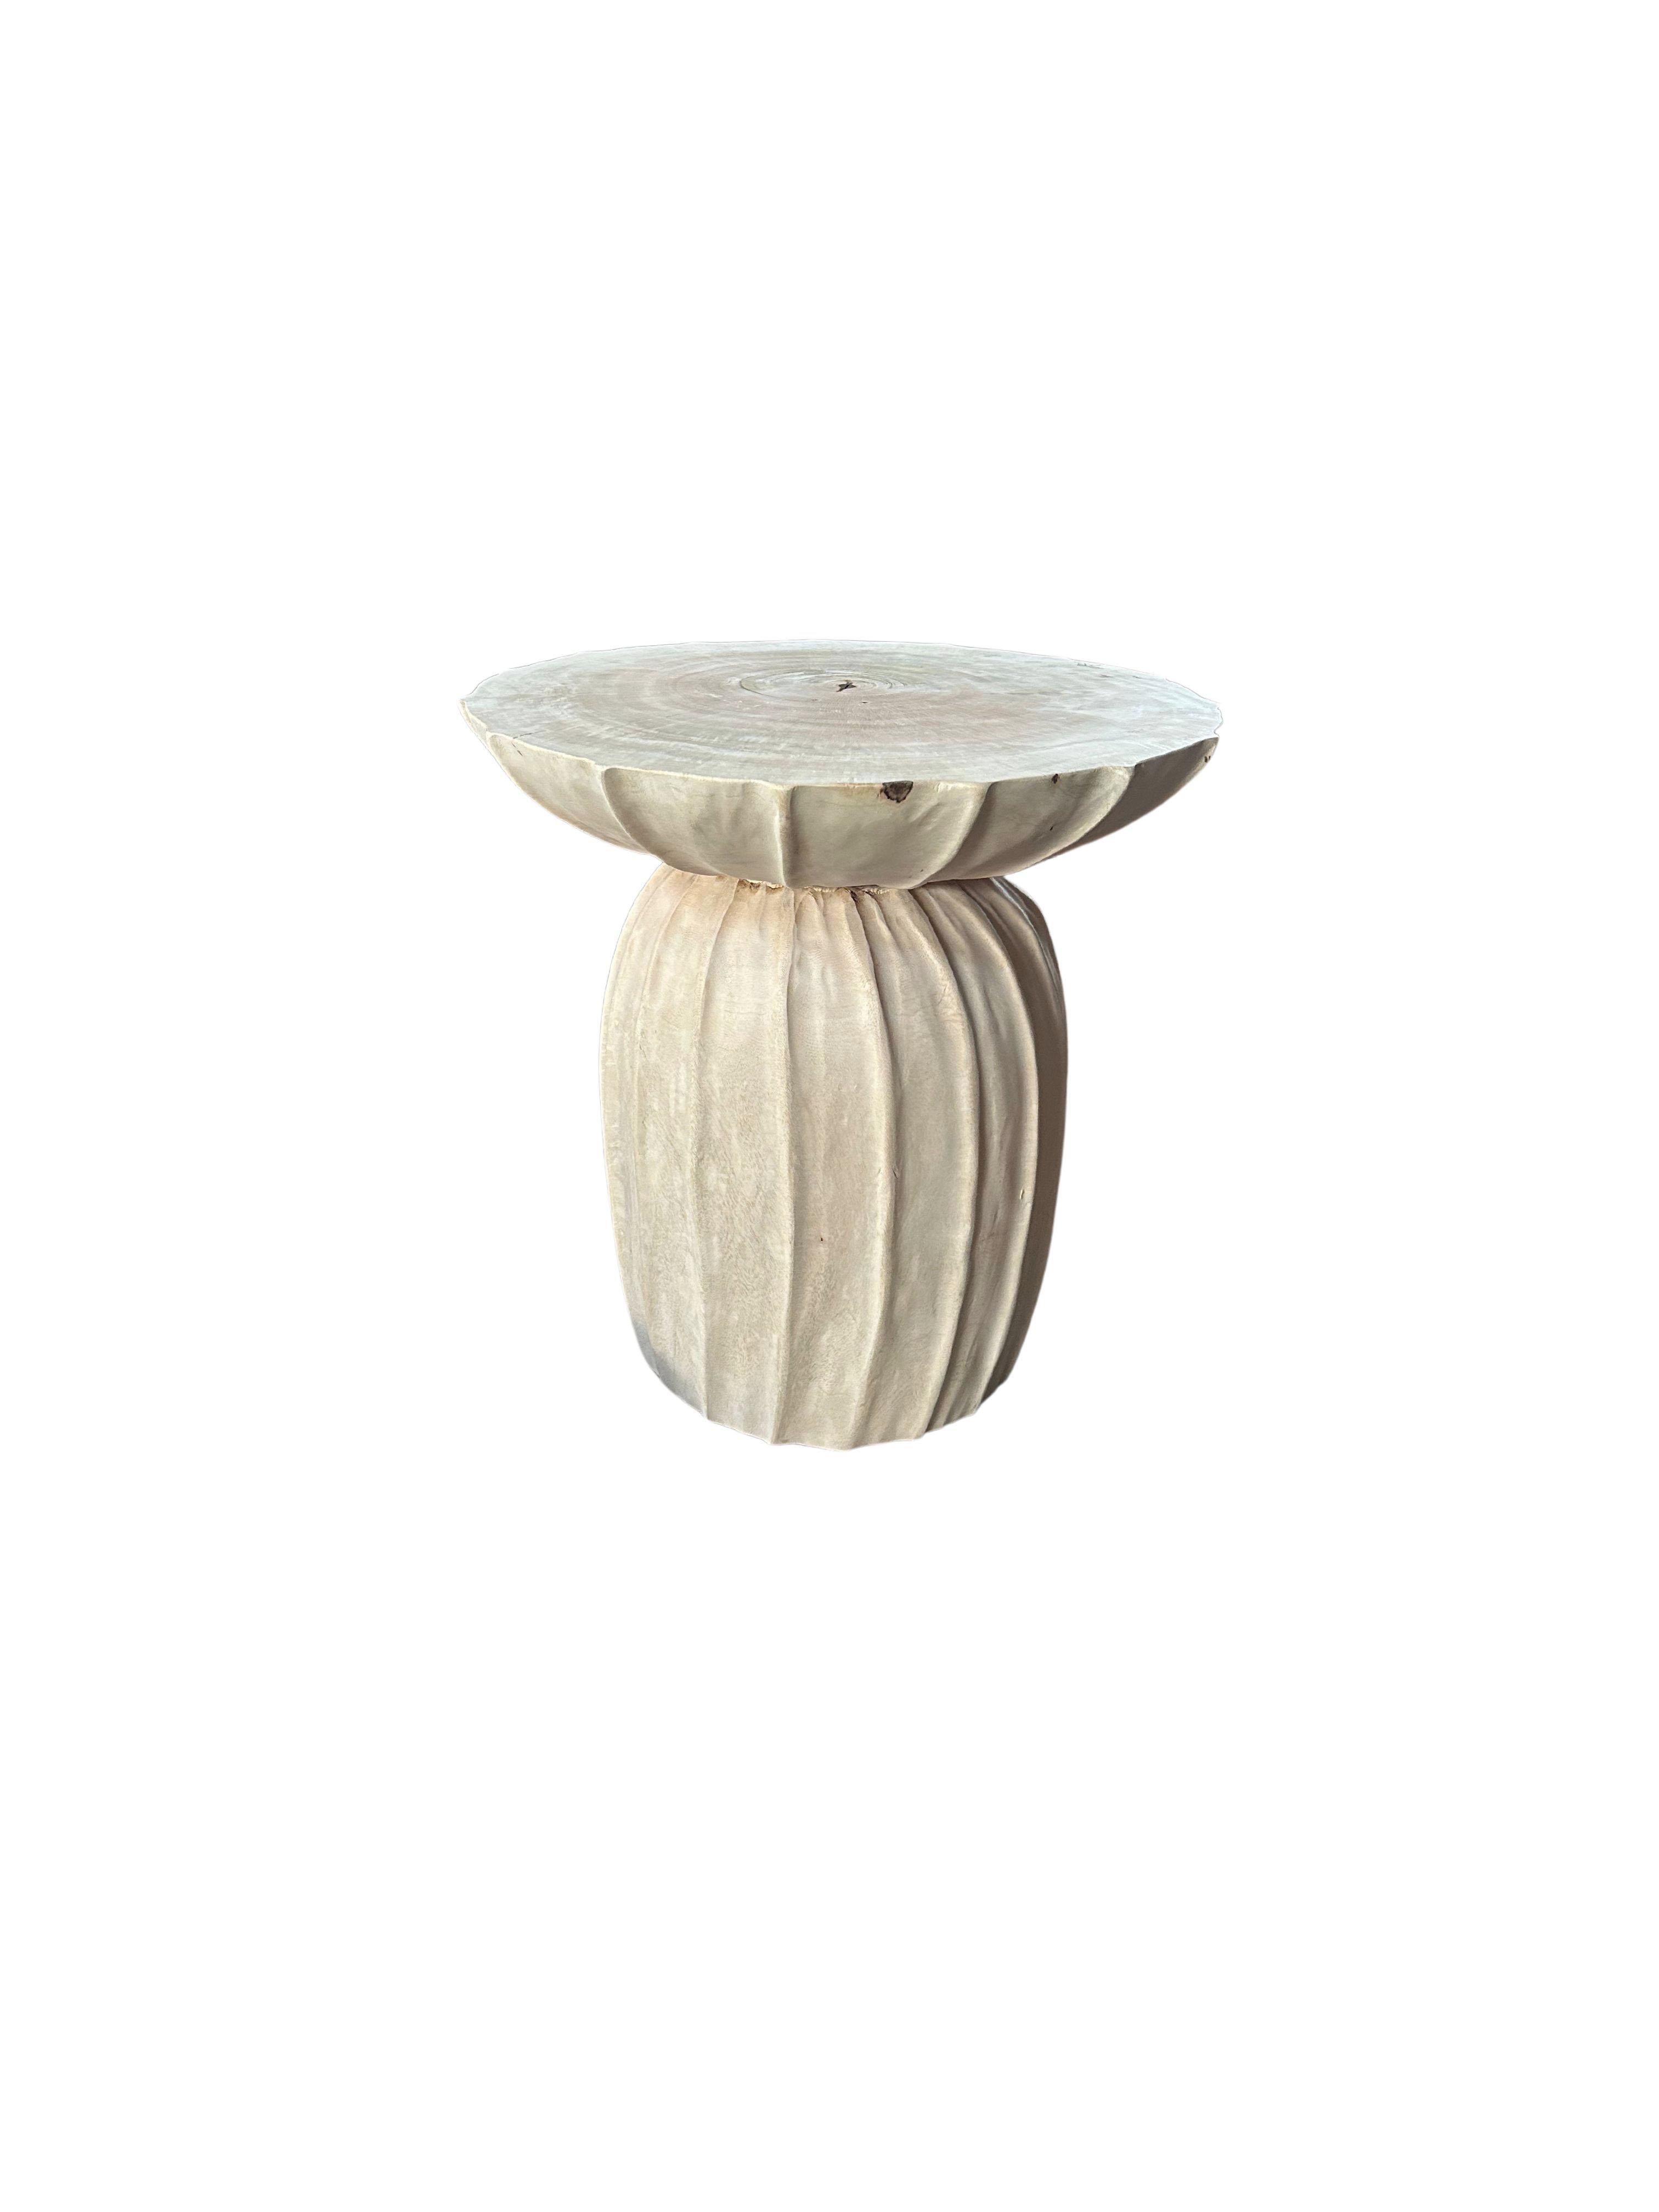 Hand-Crafted Sculptural Side Table Mango Wood Bleached Finish For Sale